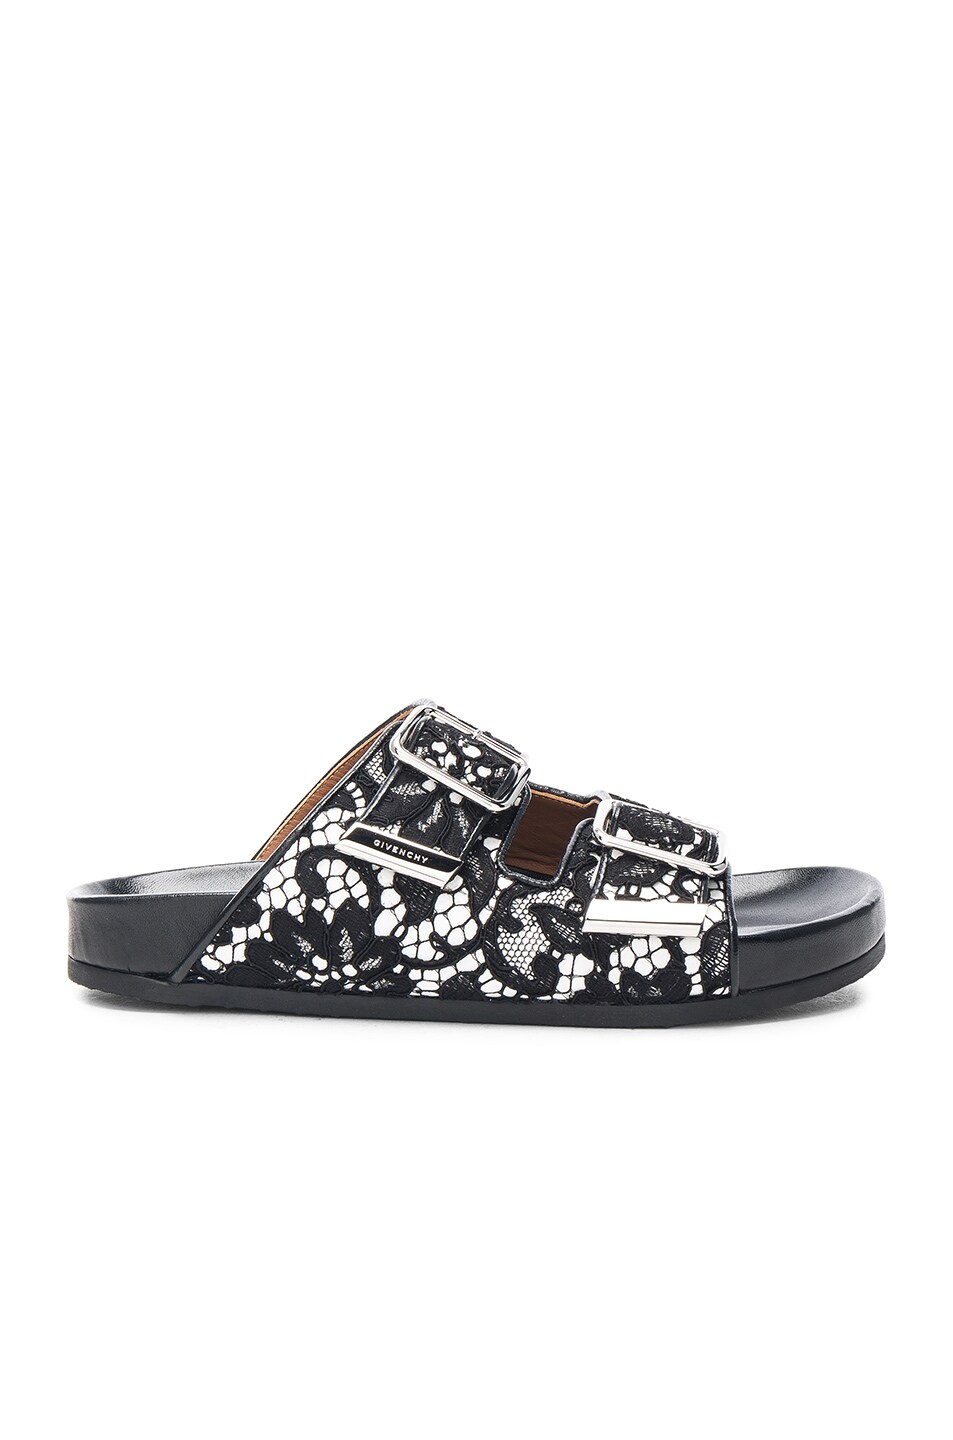 Image 1 of Givenchy Patent & Lace Swiss Sandals in Black & White